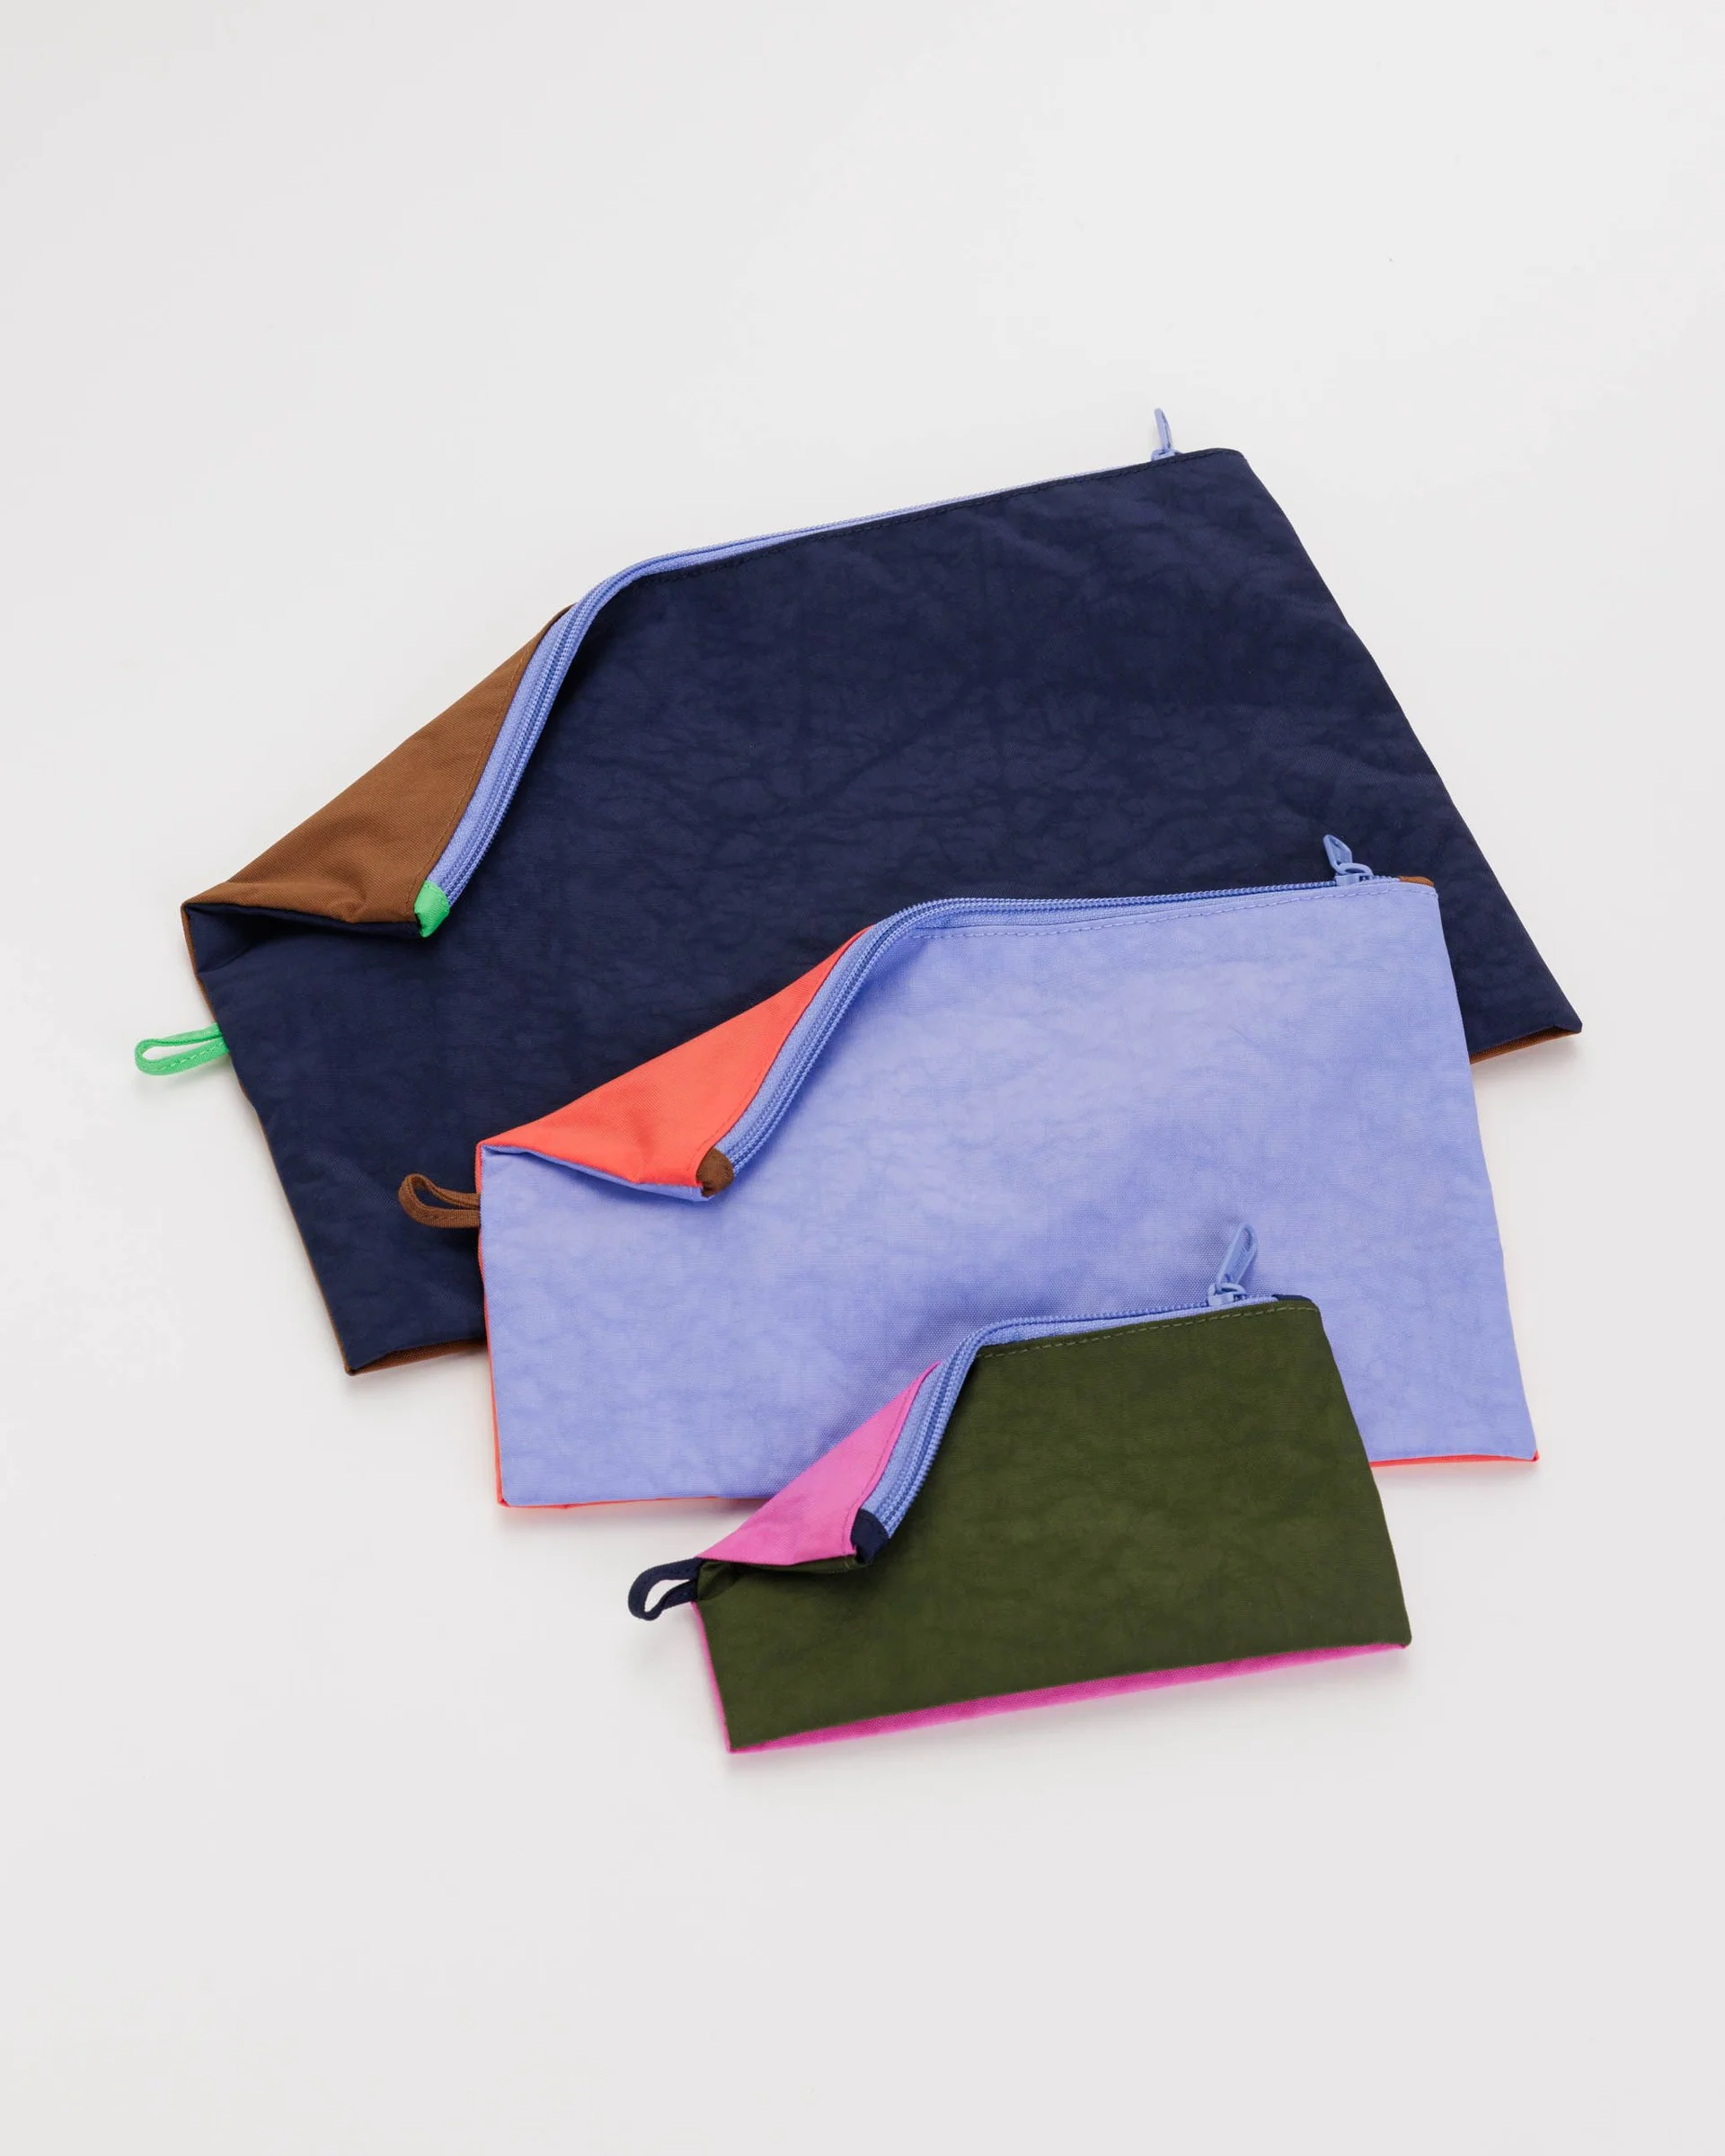 Set of 3 pouches in varying size and colors, laid flat to show size range. 